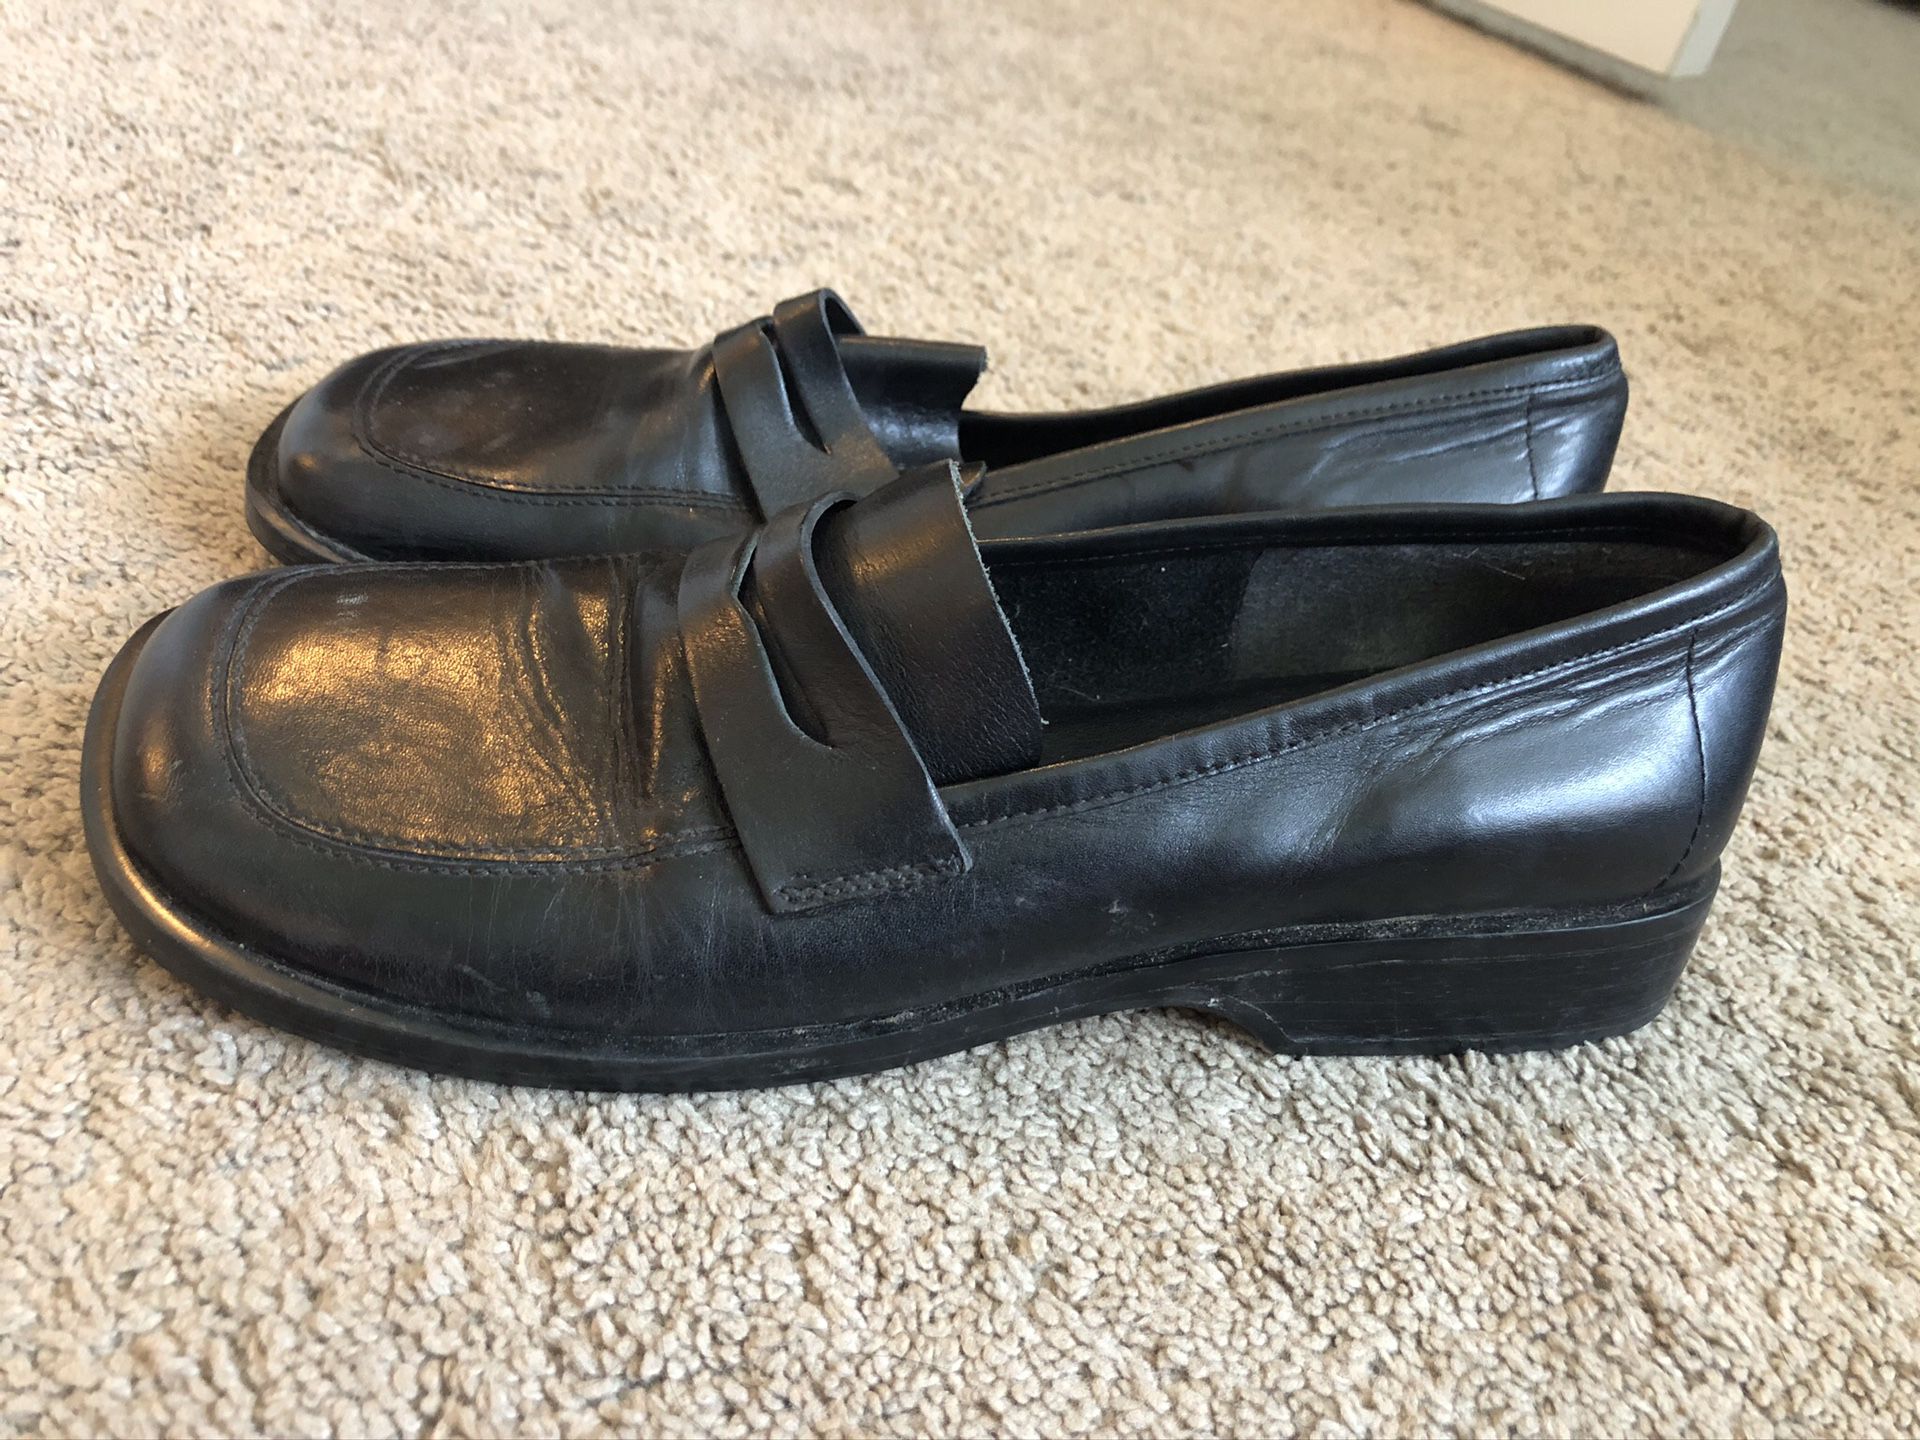 Black loafers - size 8.5